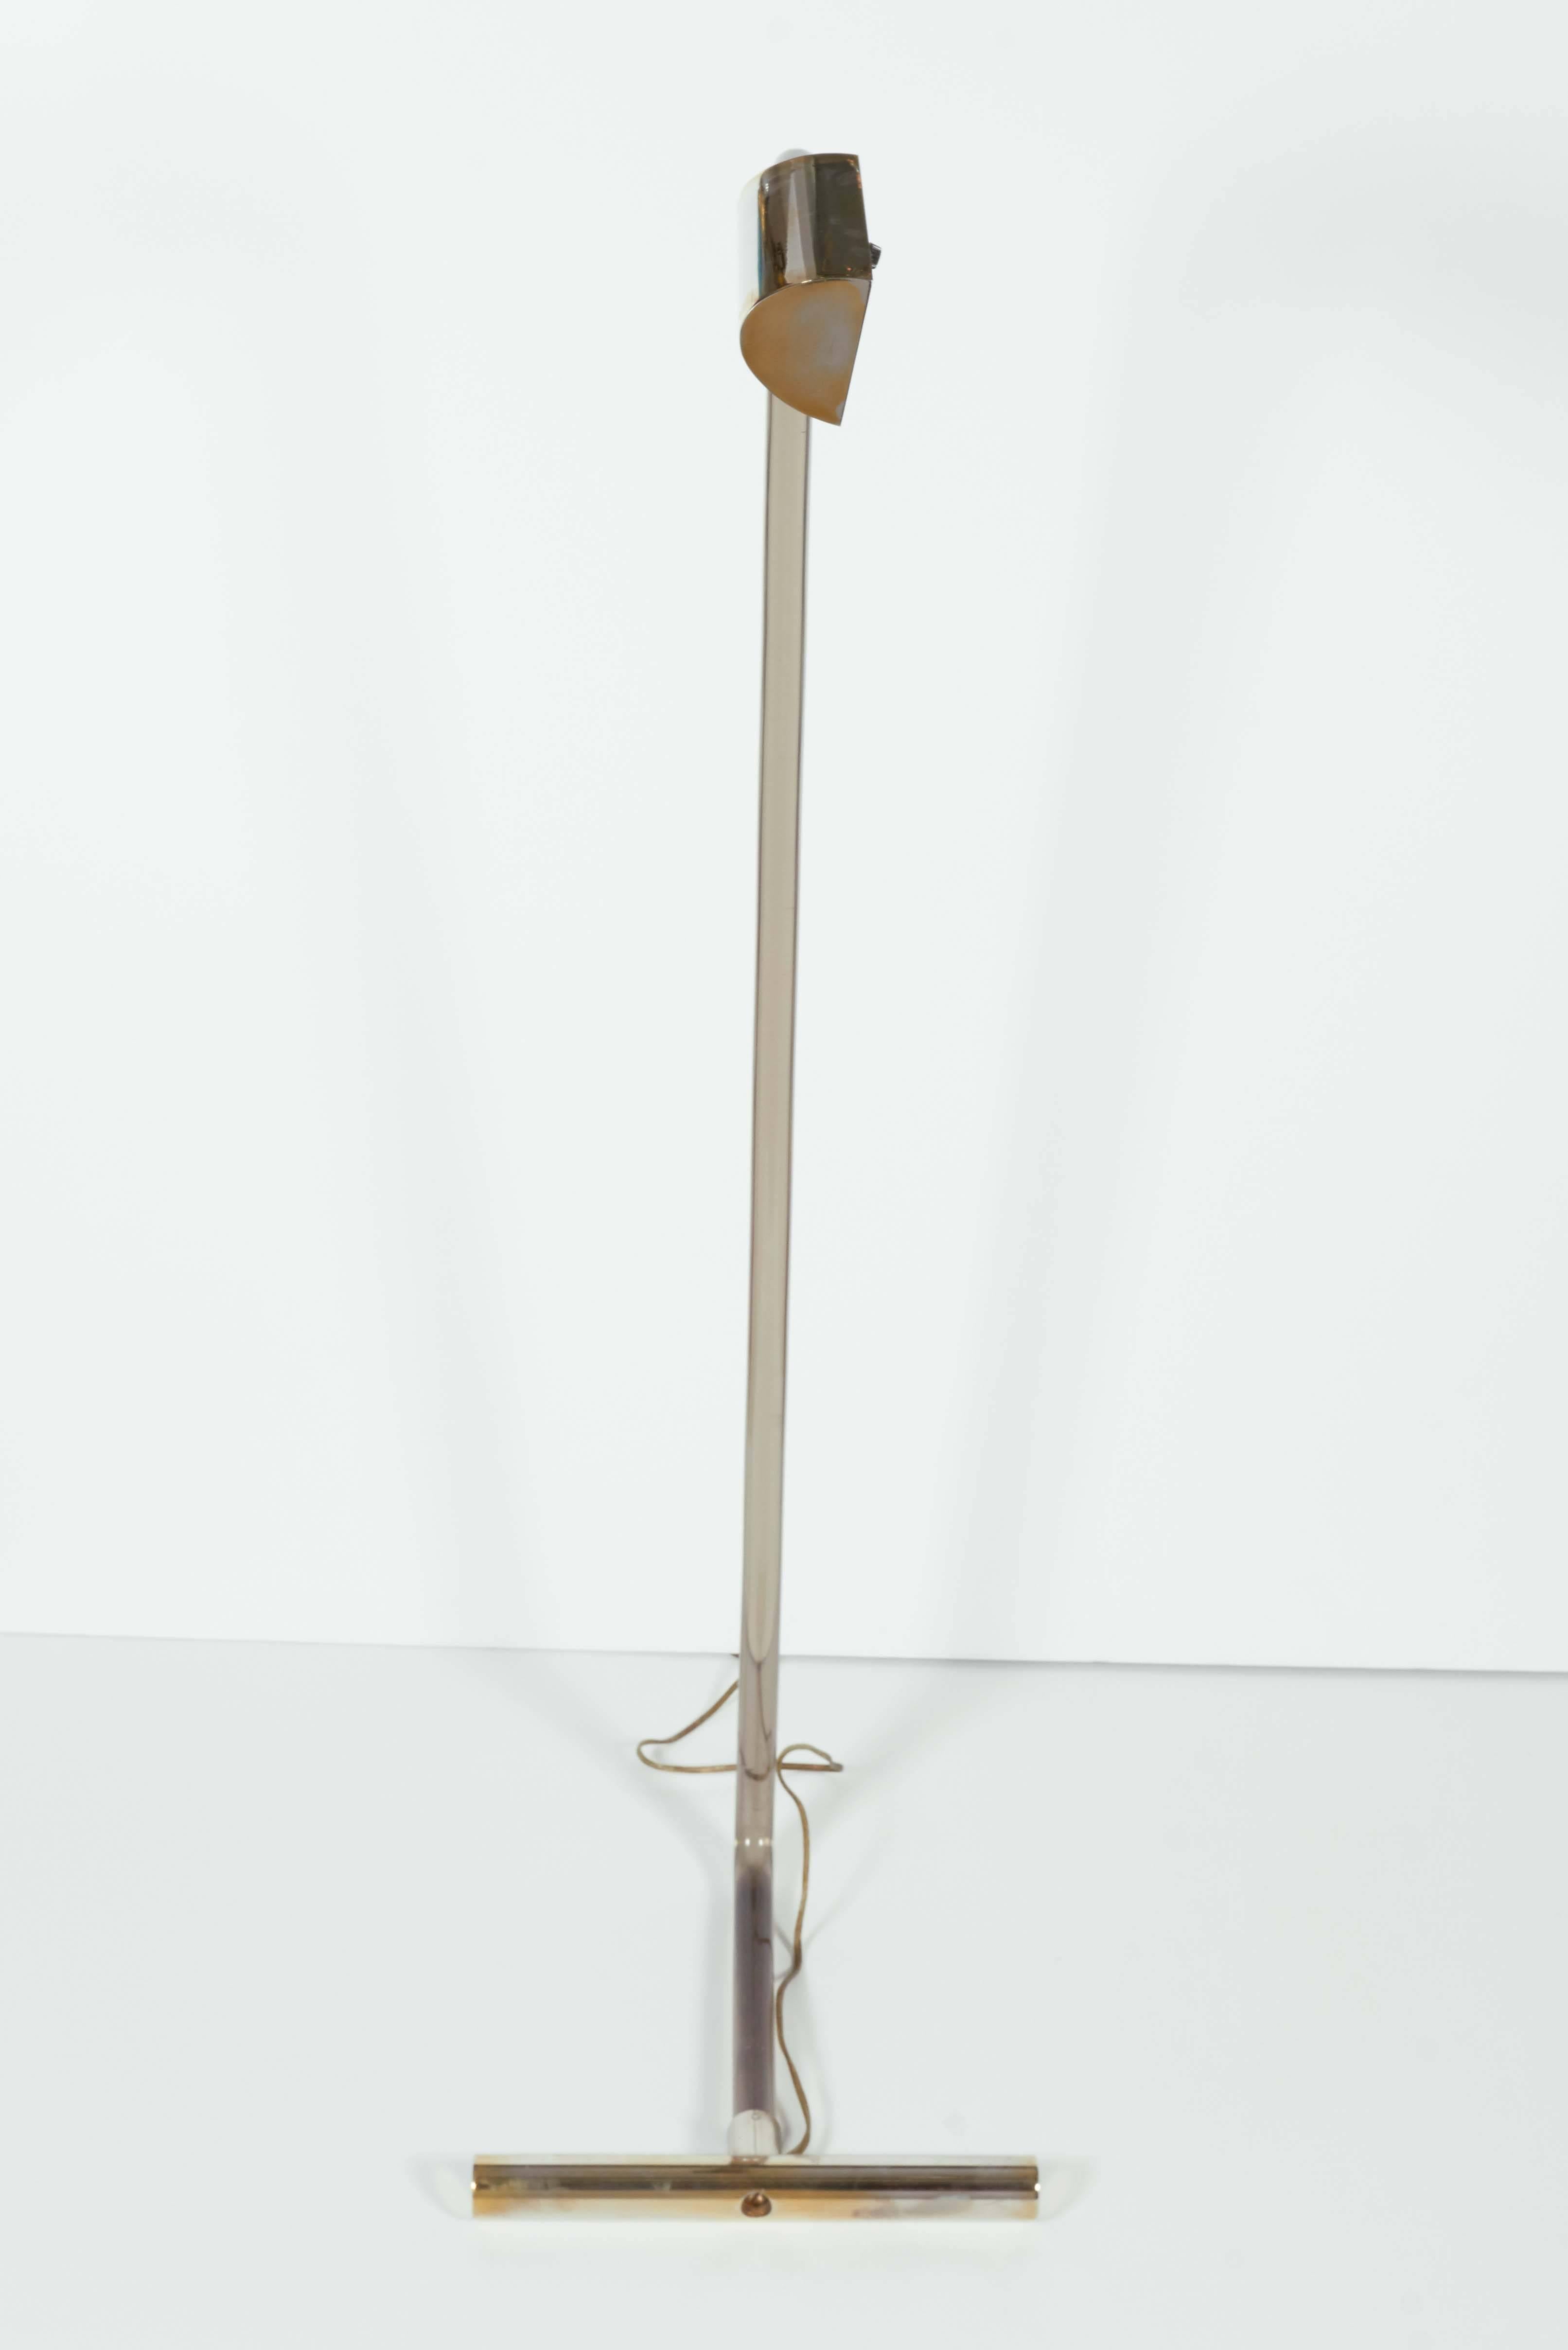 Plated Peter Hamburger Smoked Lucite Floor Lamp for Kovacs